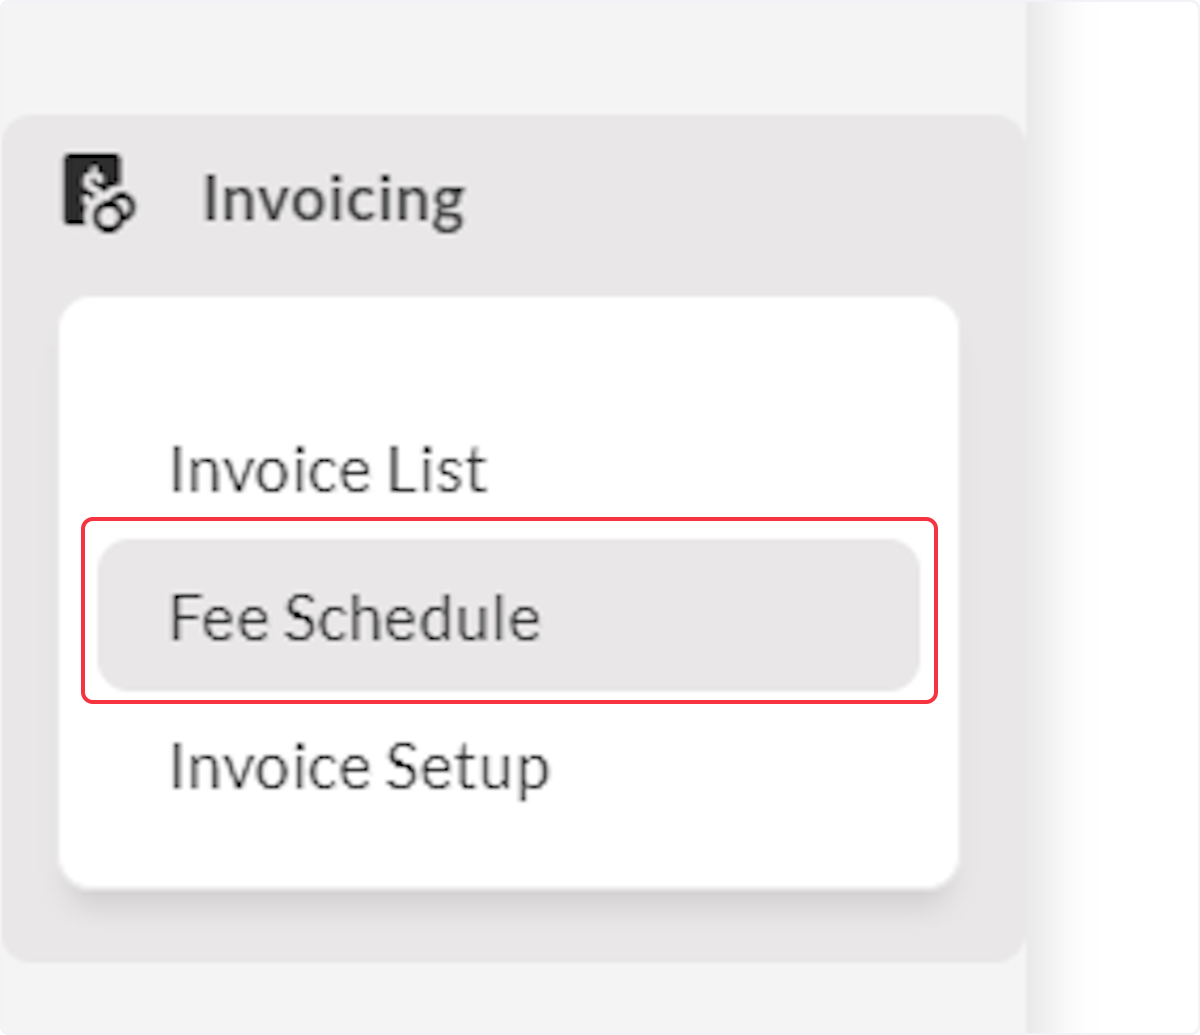 Click on Fee Schedule.